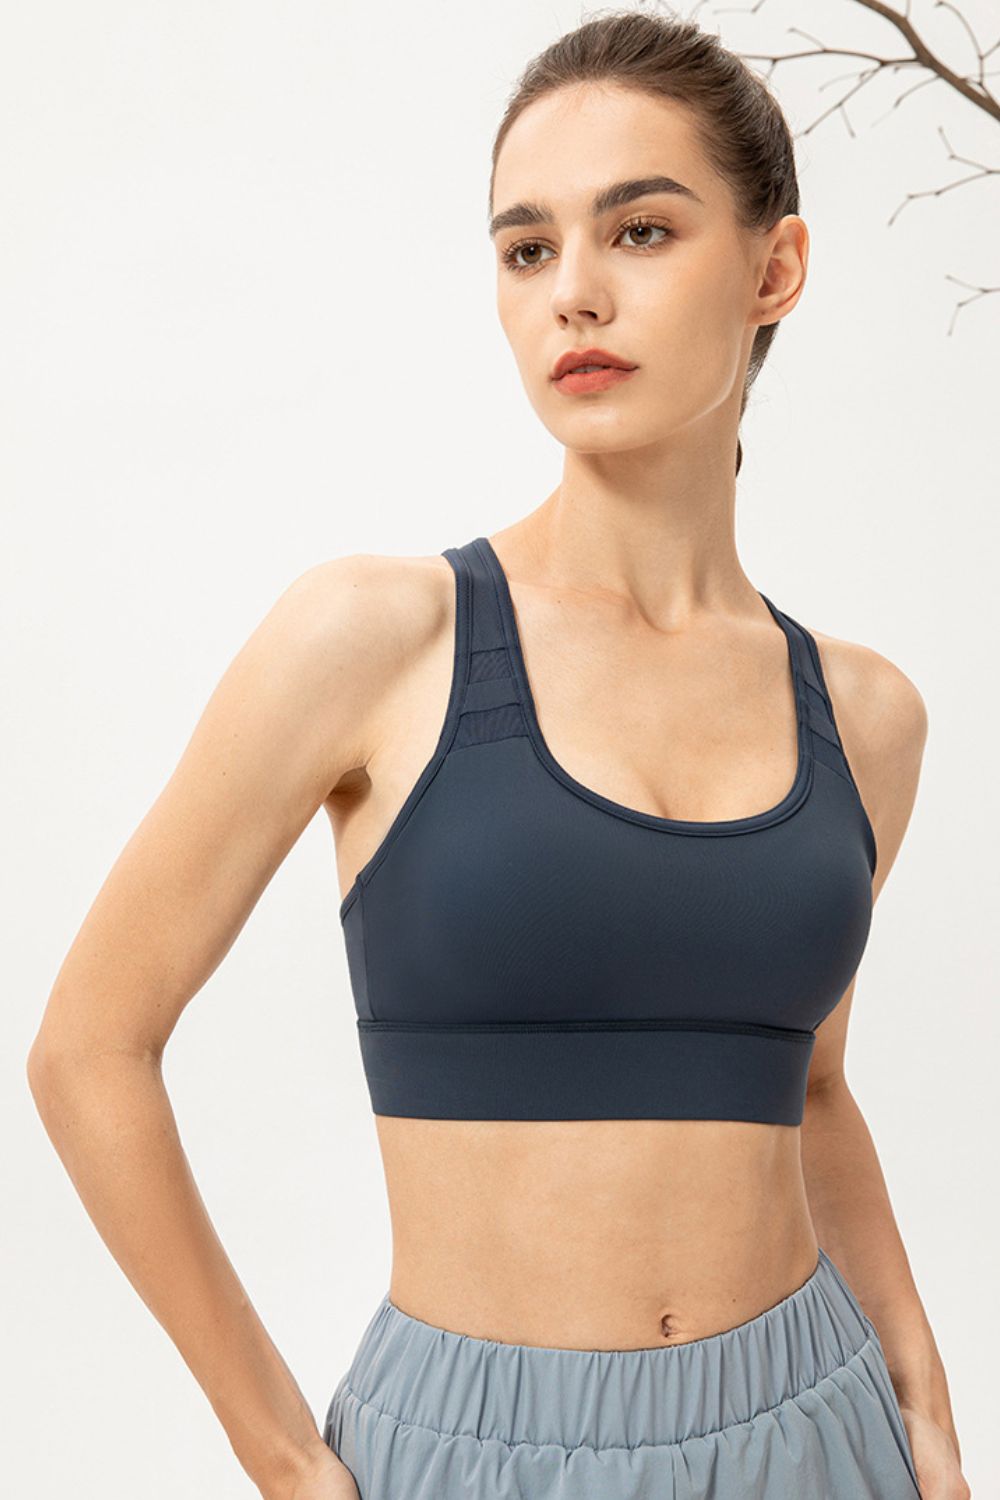 Scoop Neck Long Sports Bra Print on any thing USA/STOD clothes